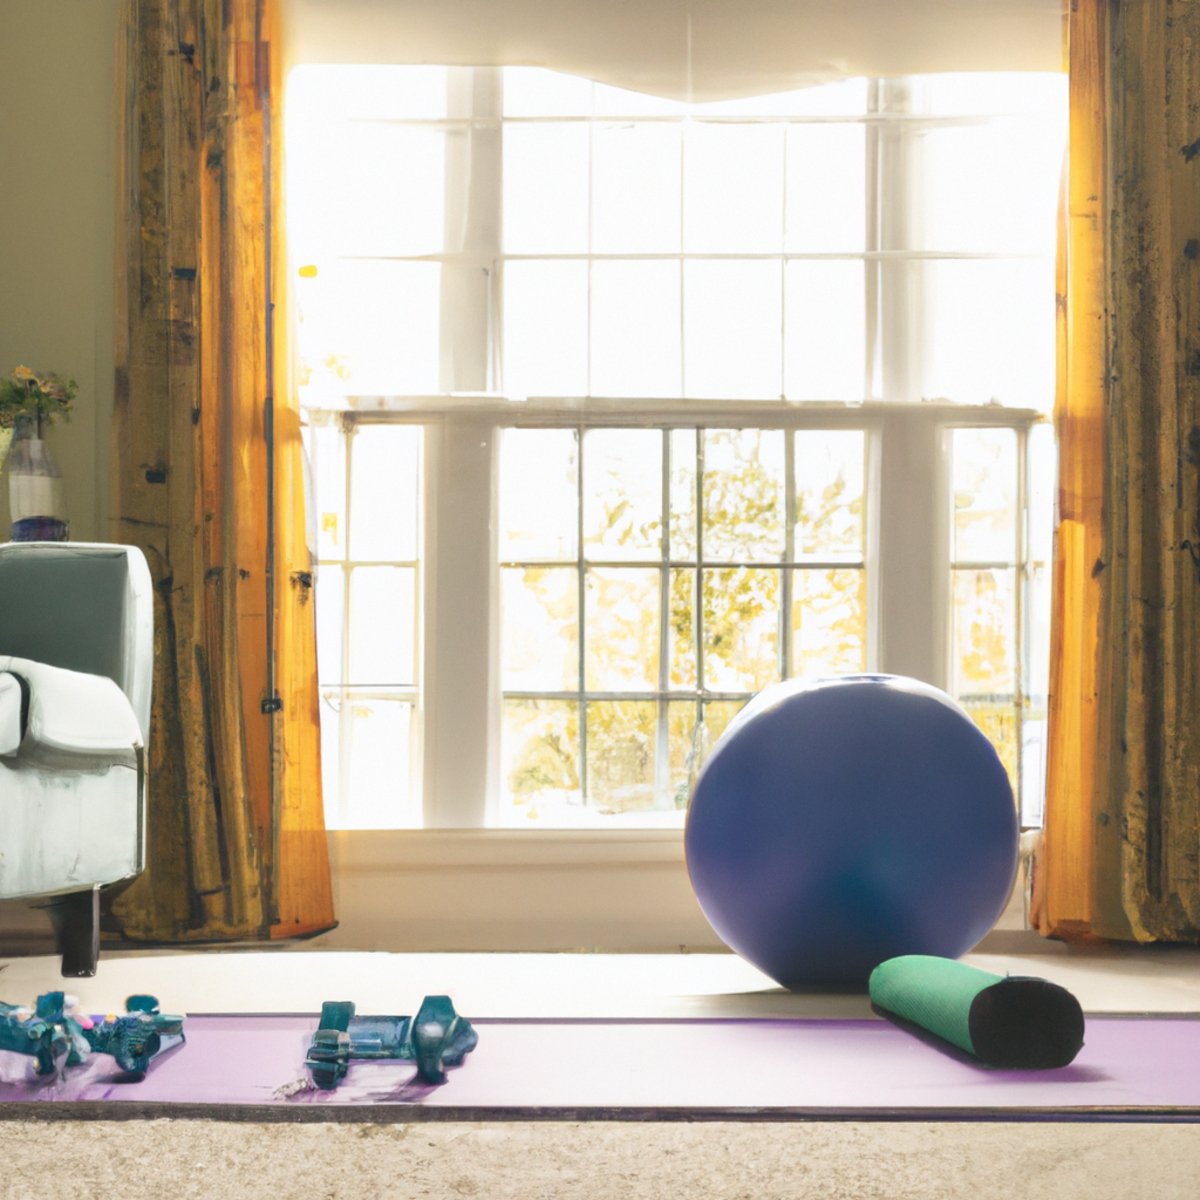 The photo captures a serene and inviting living room with a plush rug and a large window that lets in natural light. In the center of the frame, there is a yoga mat with a Pilates ball and resistance bands neatly arranged on top. A pair of dumbbells sit on the floor next to the mat. The camera angle is slightly elevated, giving a clear view of the objects and emphasizing their importance in the at-home workout routine. The overall aesthetic is clean and minimalist, with a focus on functionality and practicality.